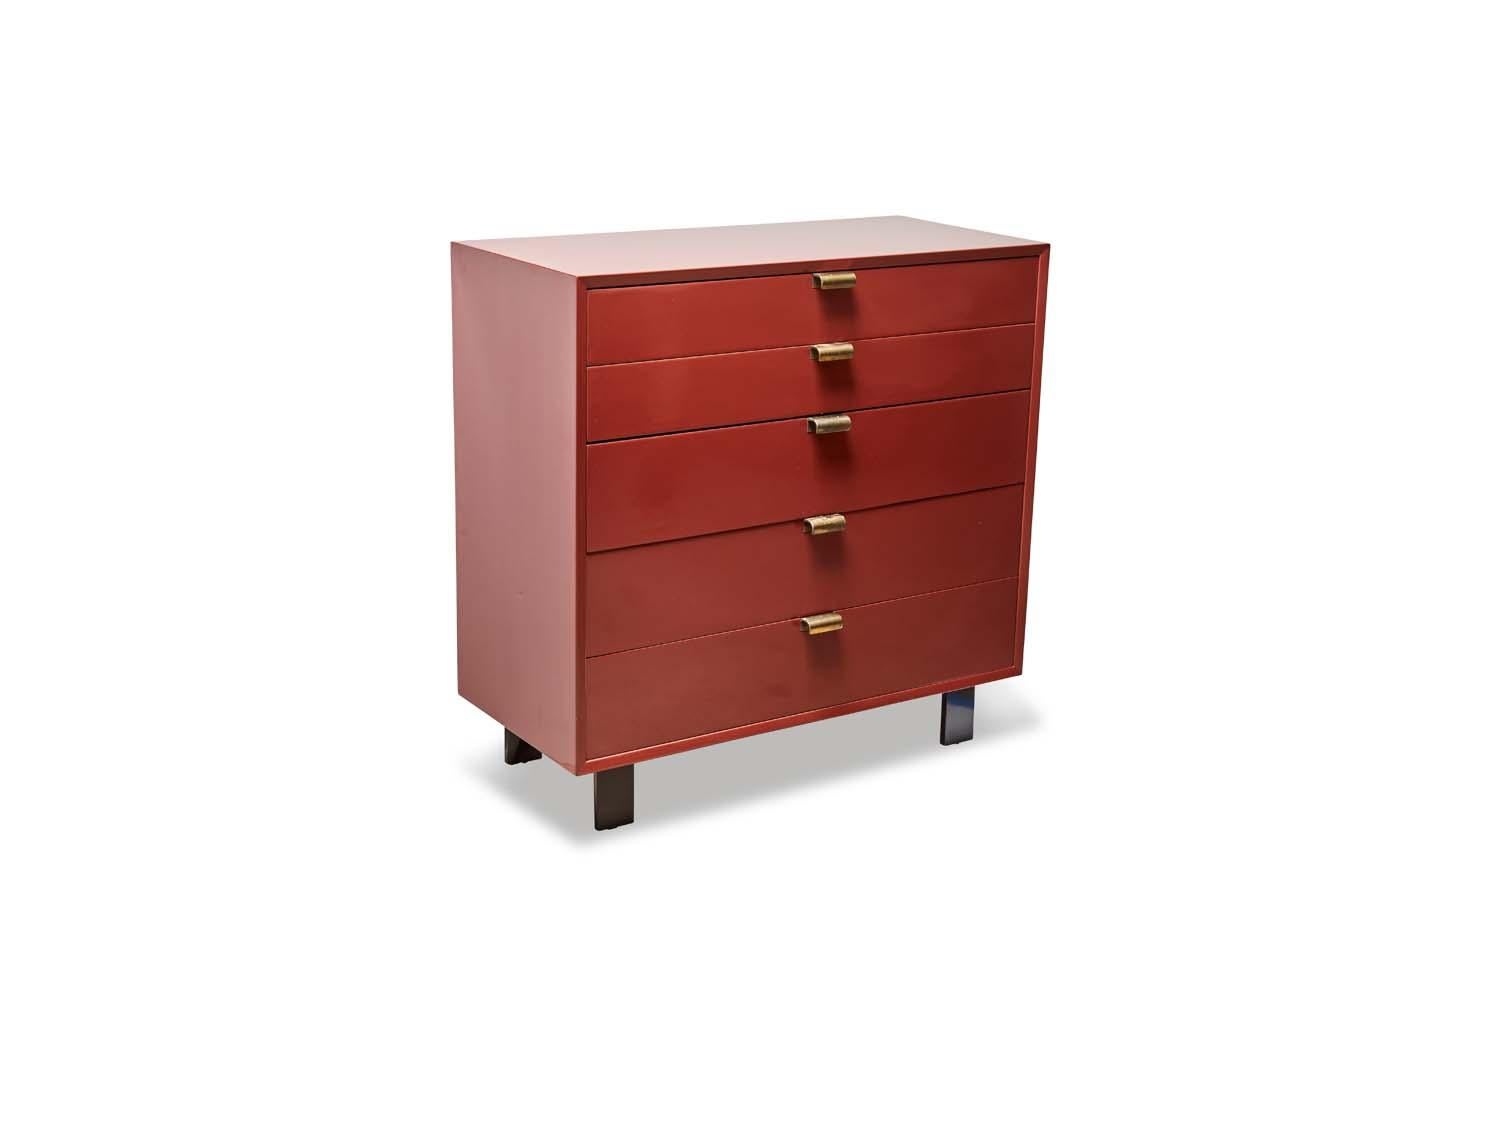 Red lacquered Herman Miller chest by George Nelson.